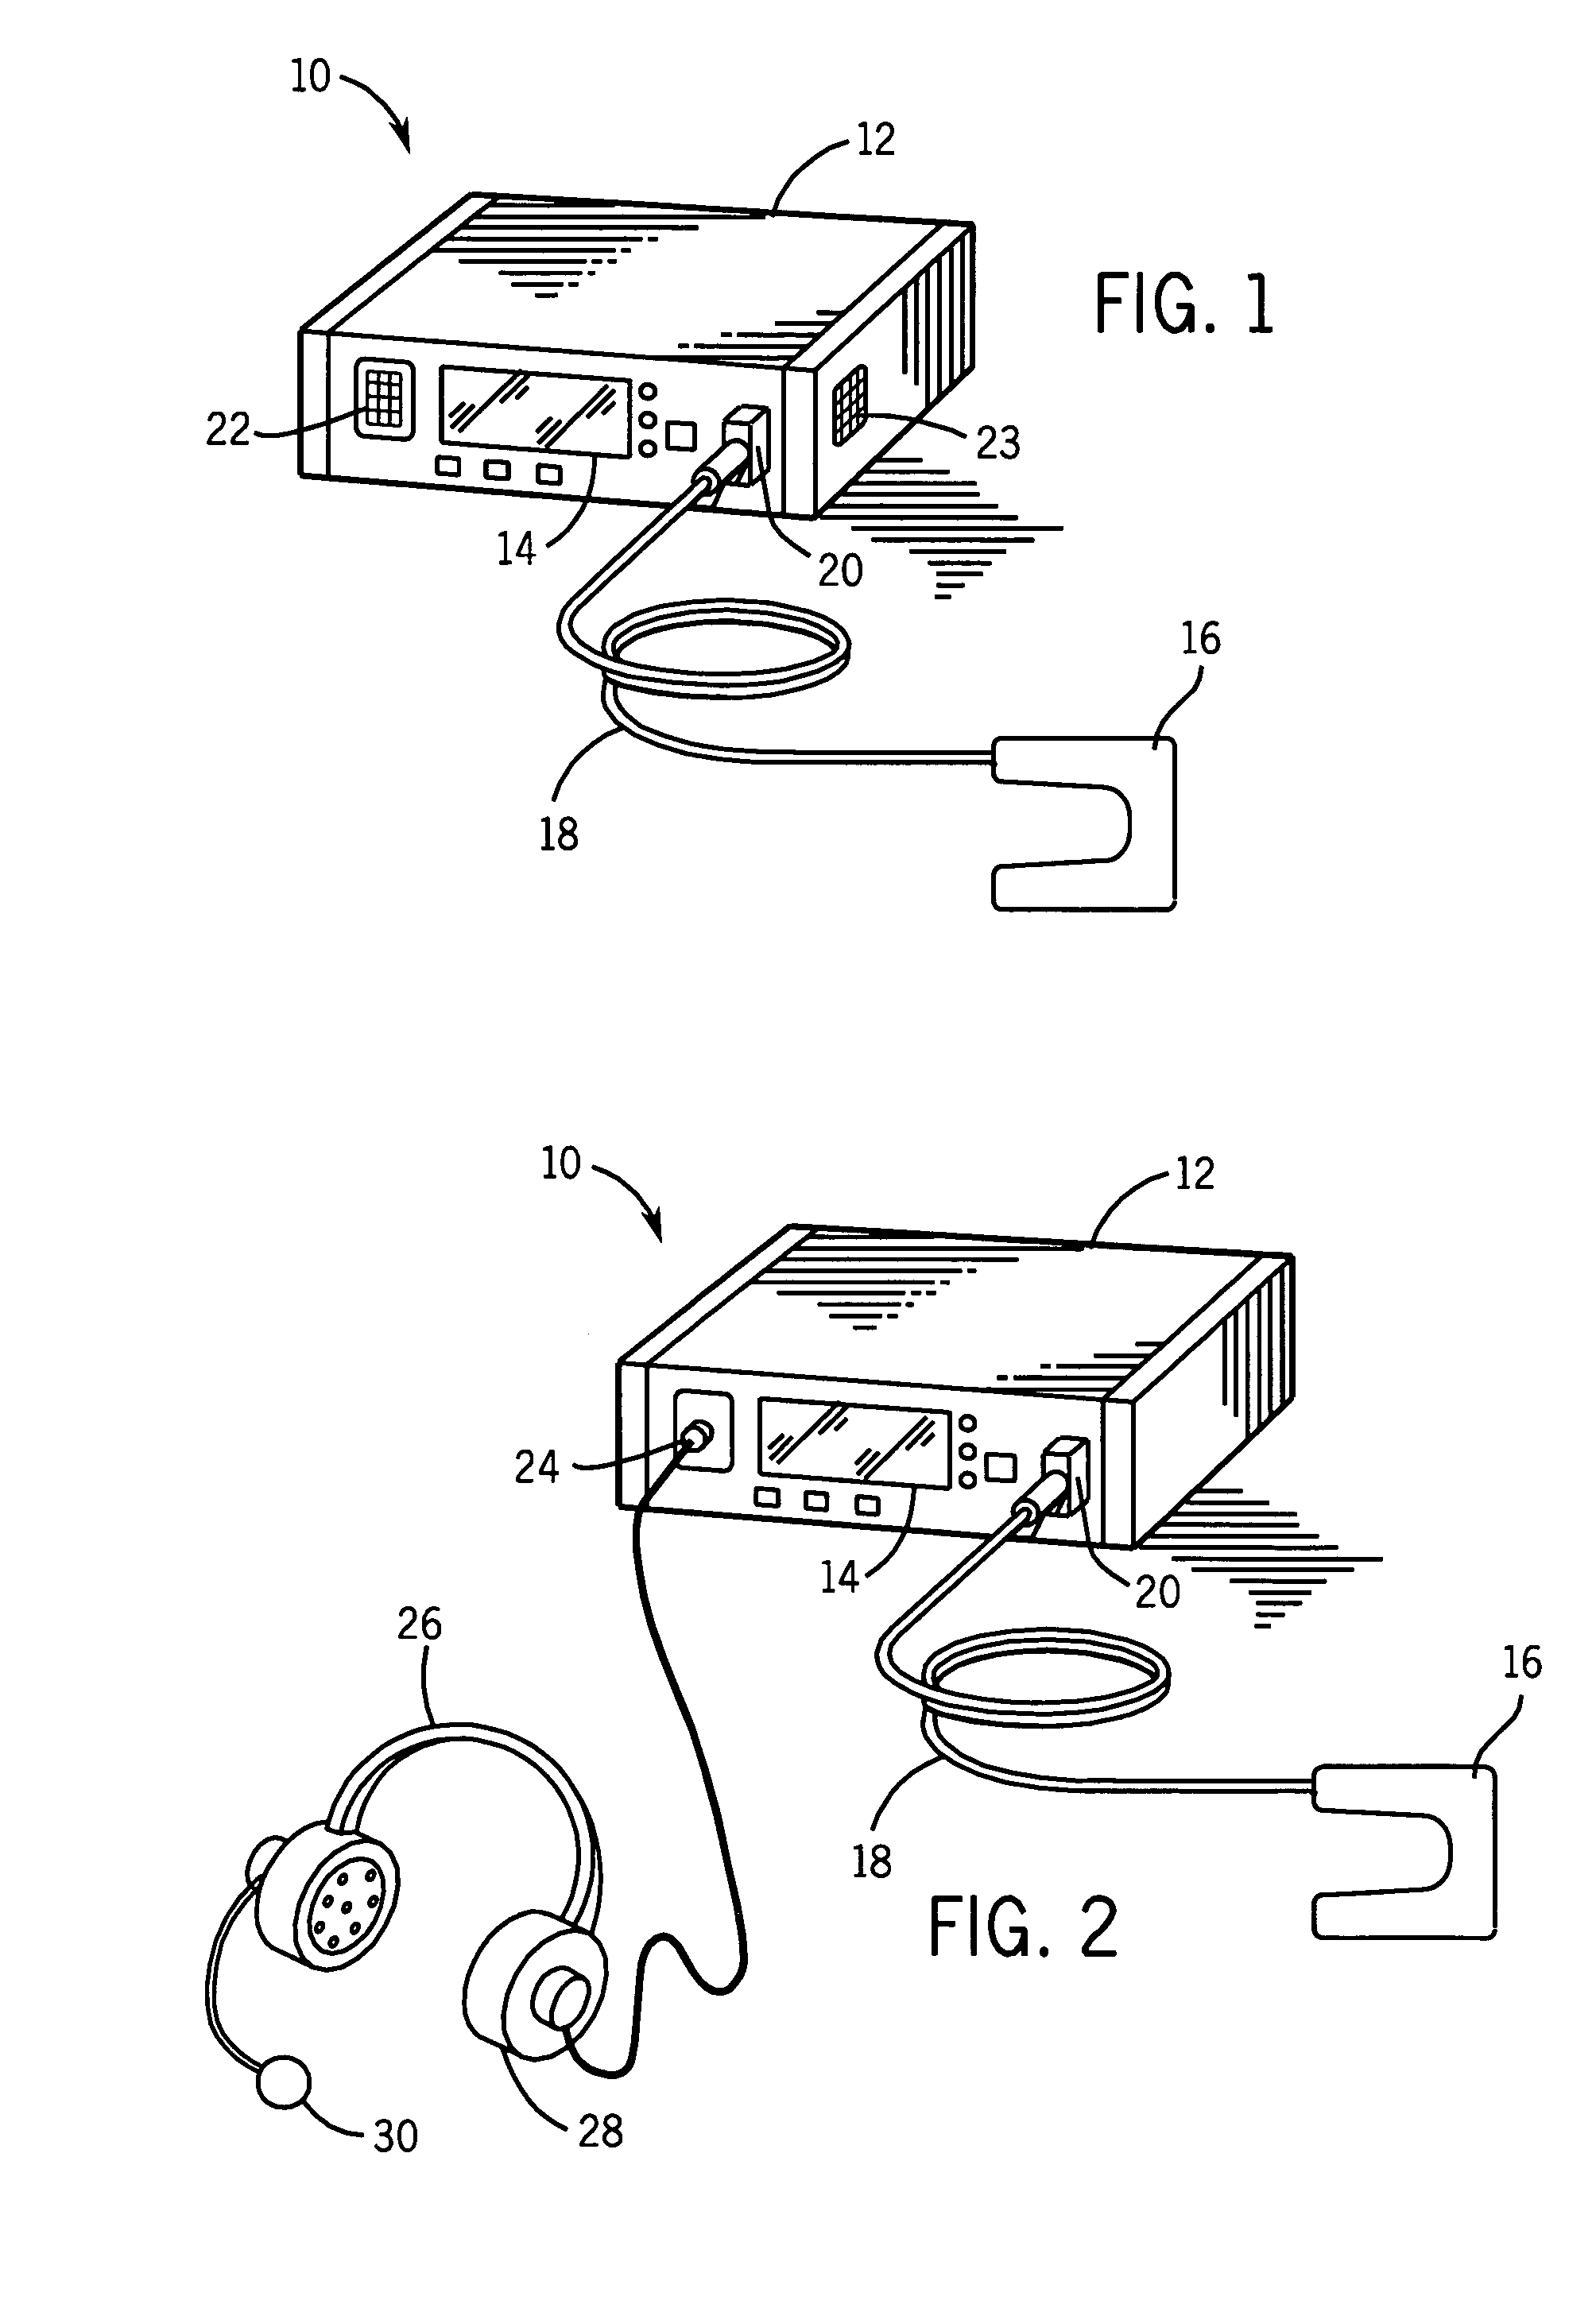 System and method for secure voice identification in a medical device